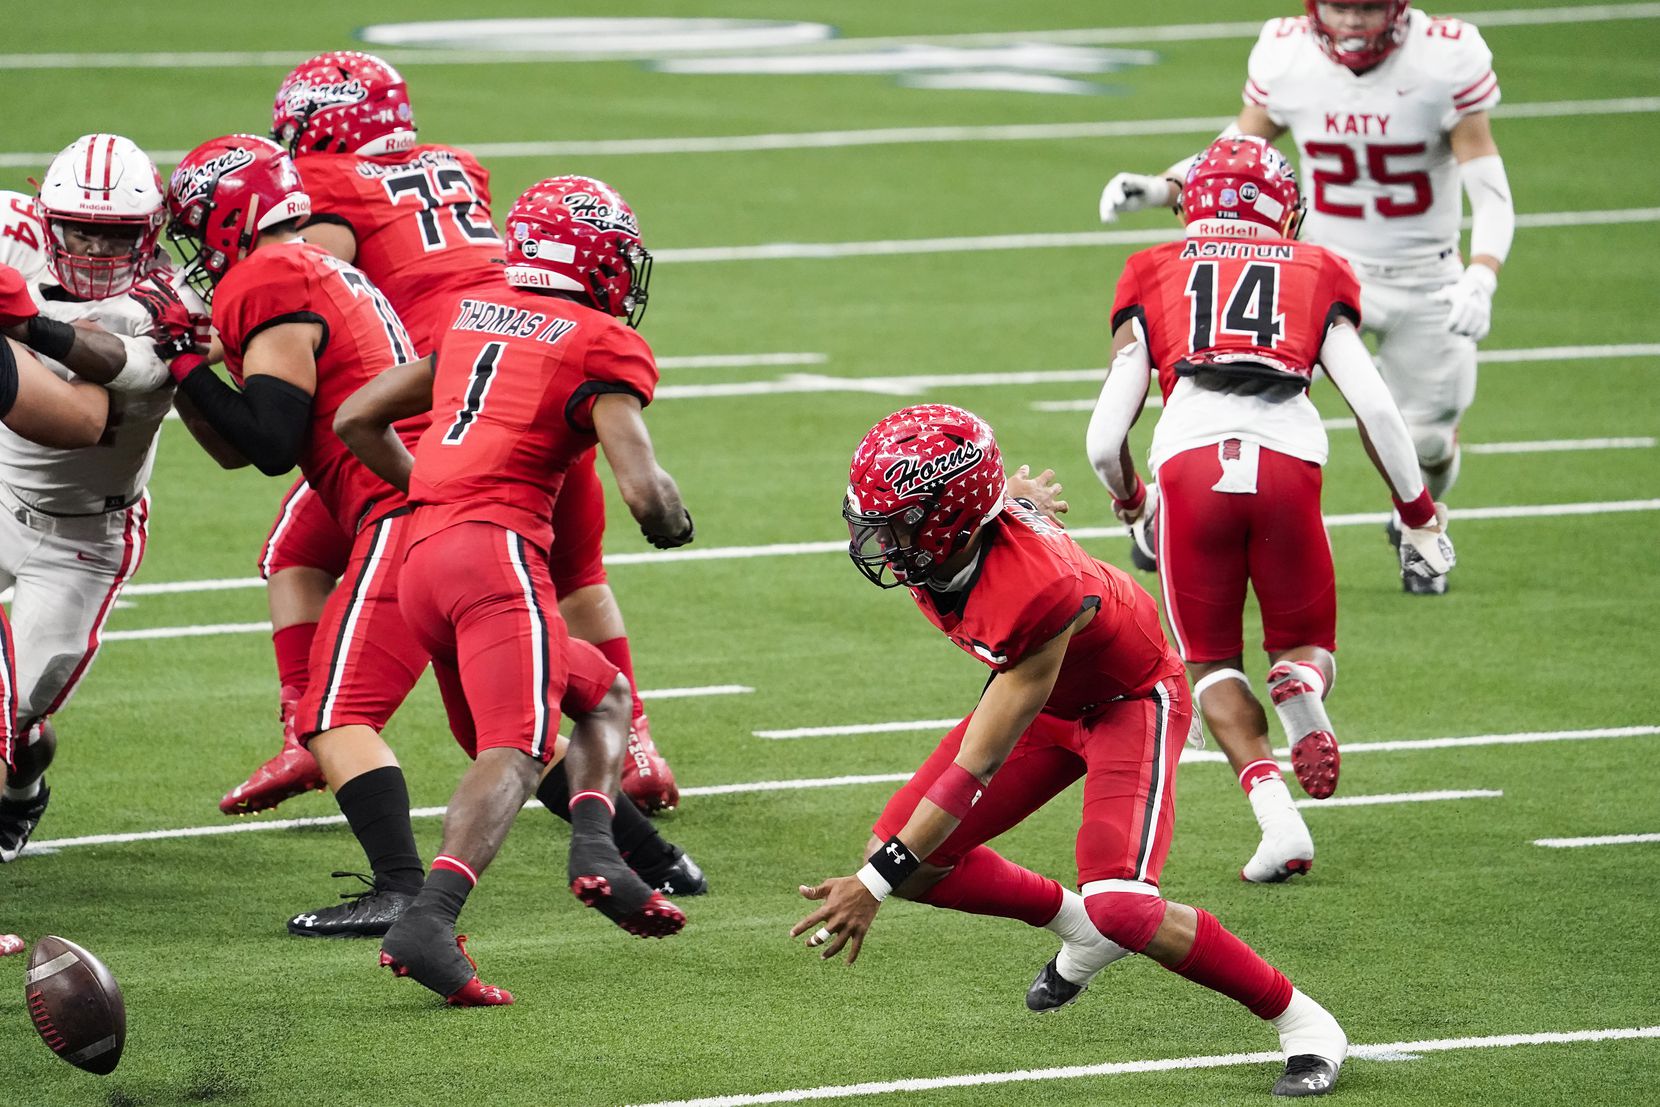 Cedar Hill quarterback Kaidon Salter (7) chases after his own fumble during the first half of the Class 6A Division II state football championship game against Katy at AT&T Stadium on Saturday, Jan. 16, 2021, in Arlington, Texas.